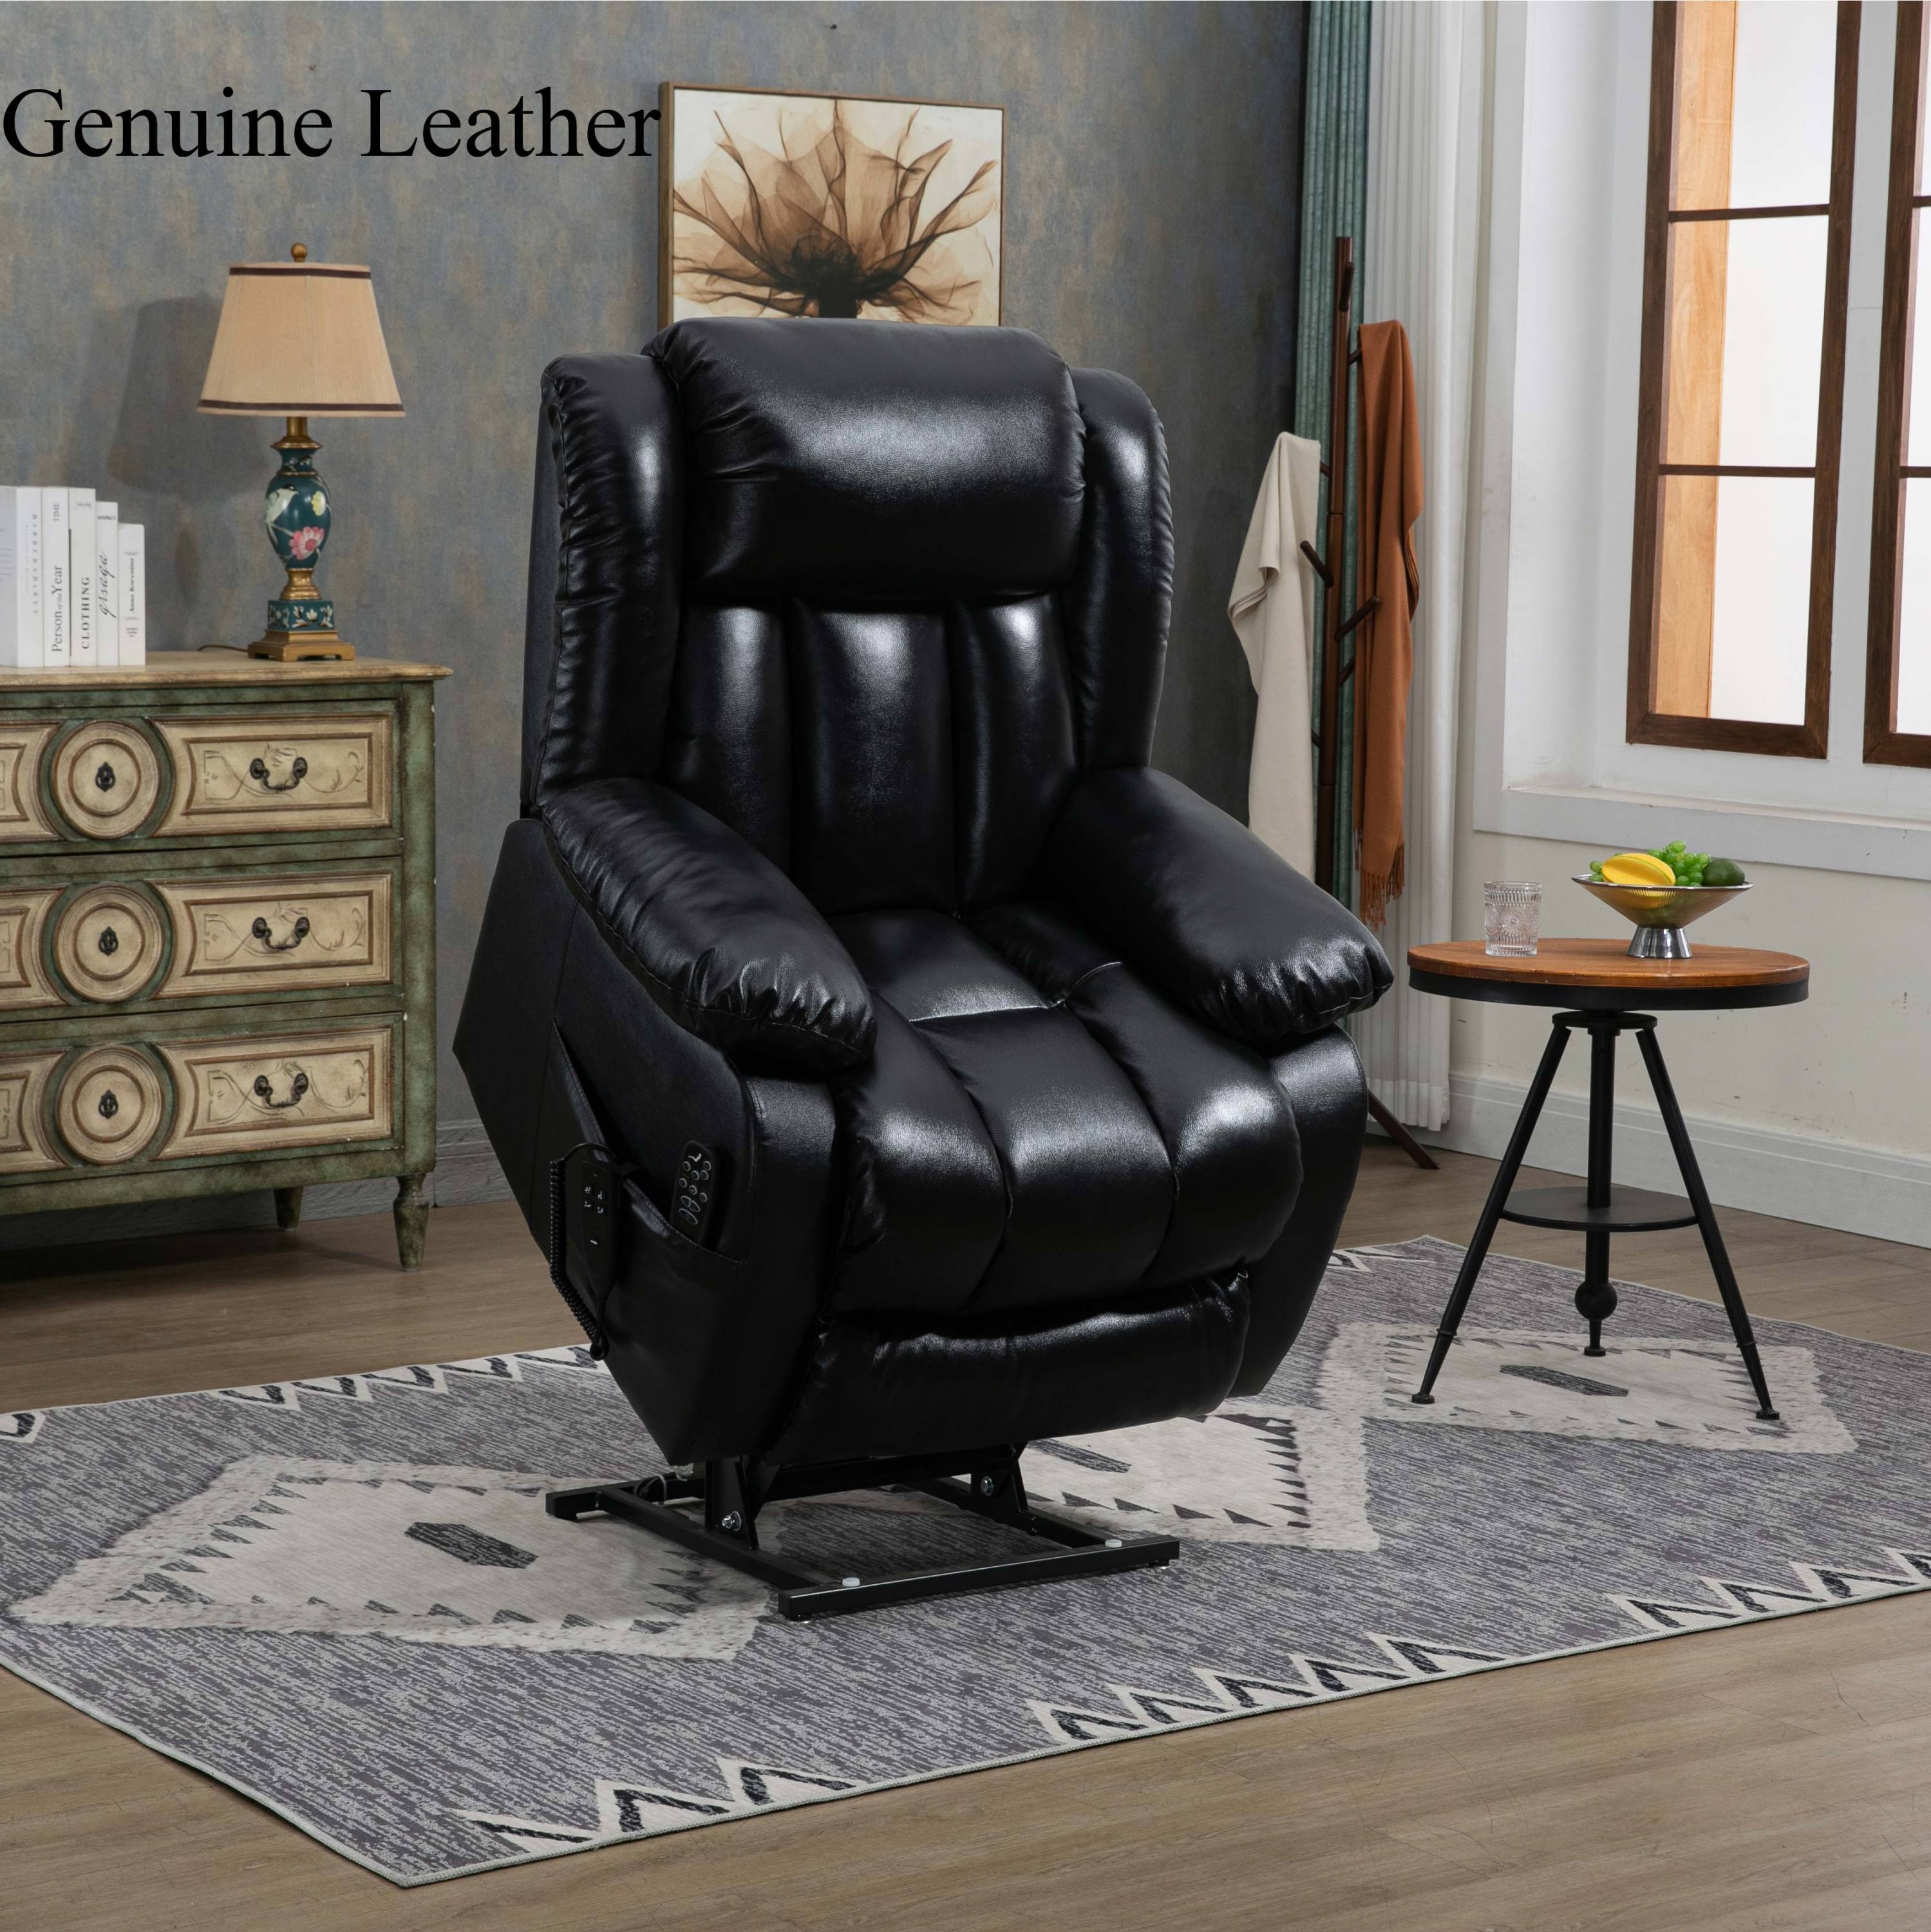 Medium Size Infinite Position Black Leather Power Lift Recliner Chair with Massage and Heat